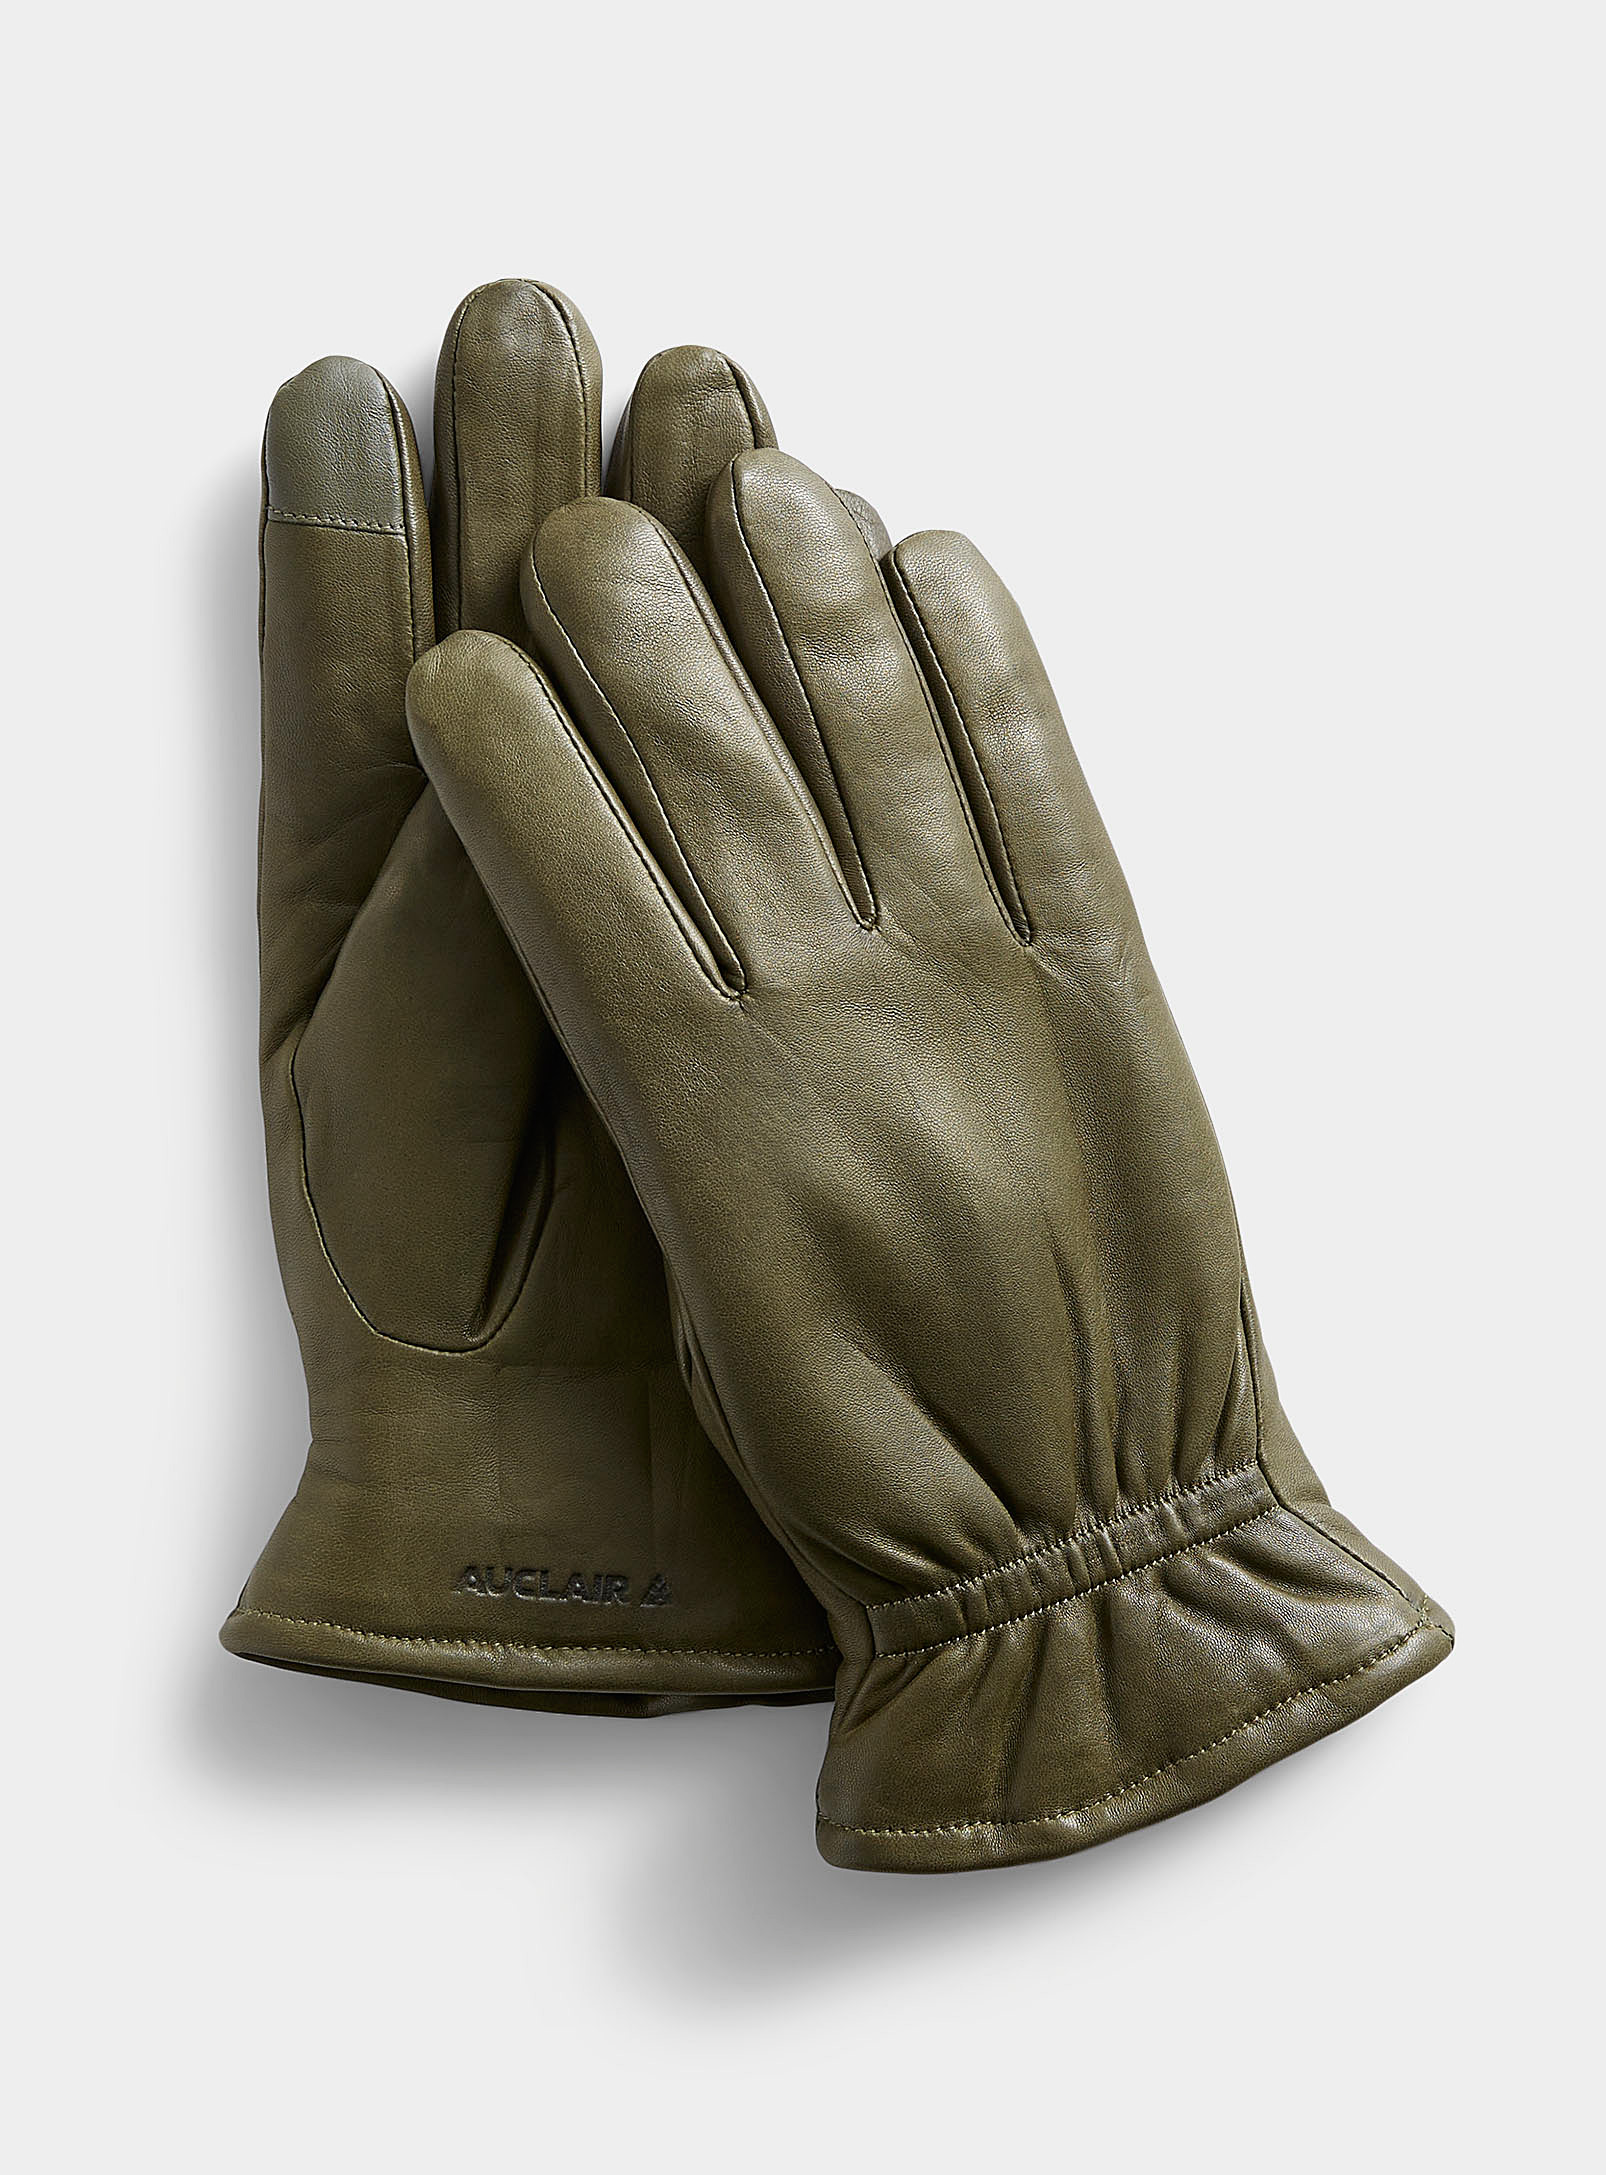 Auclair - Women's Demi lined leather gloves